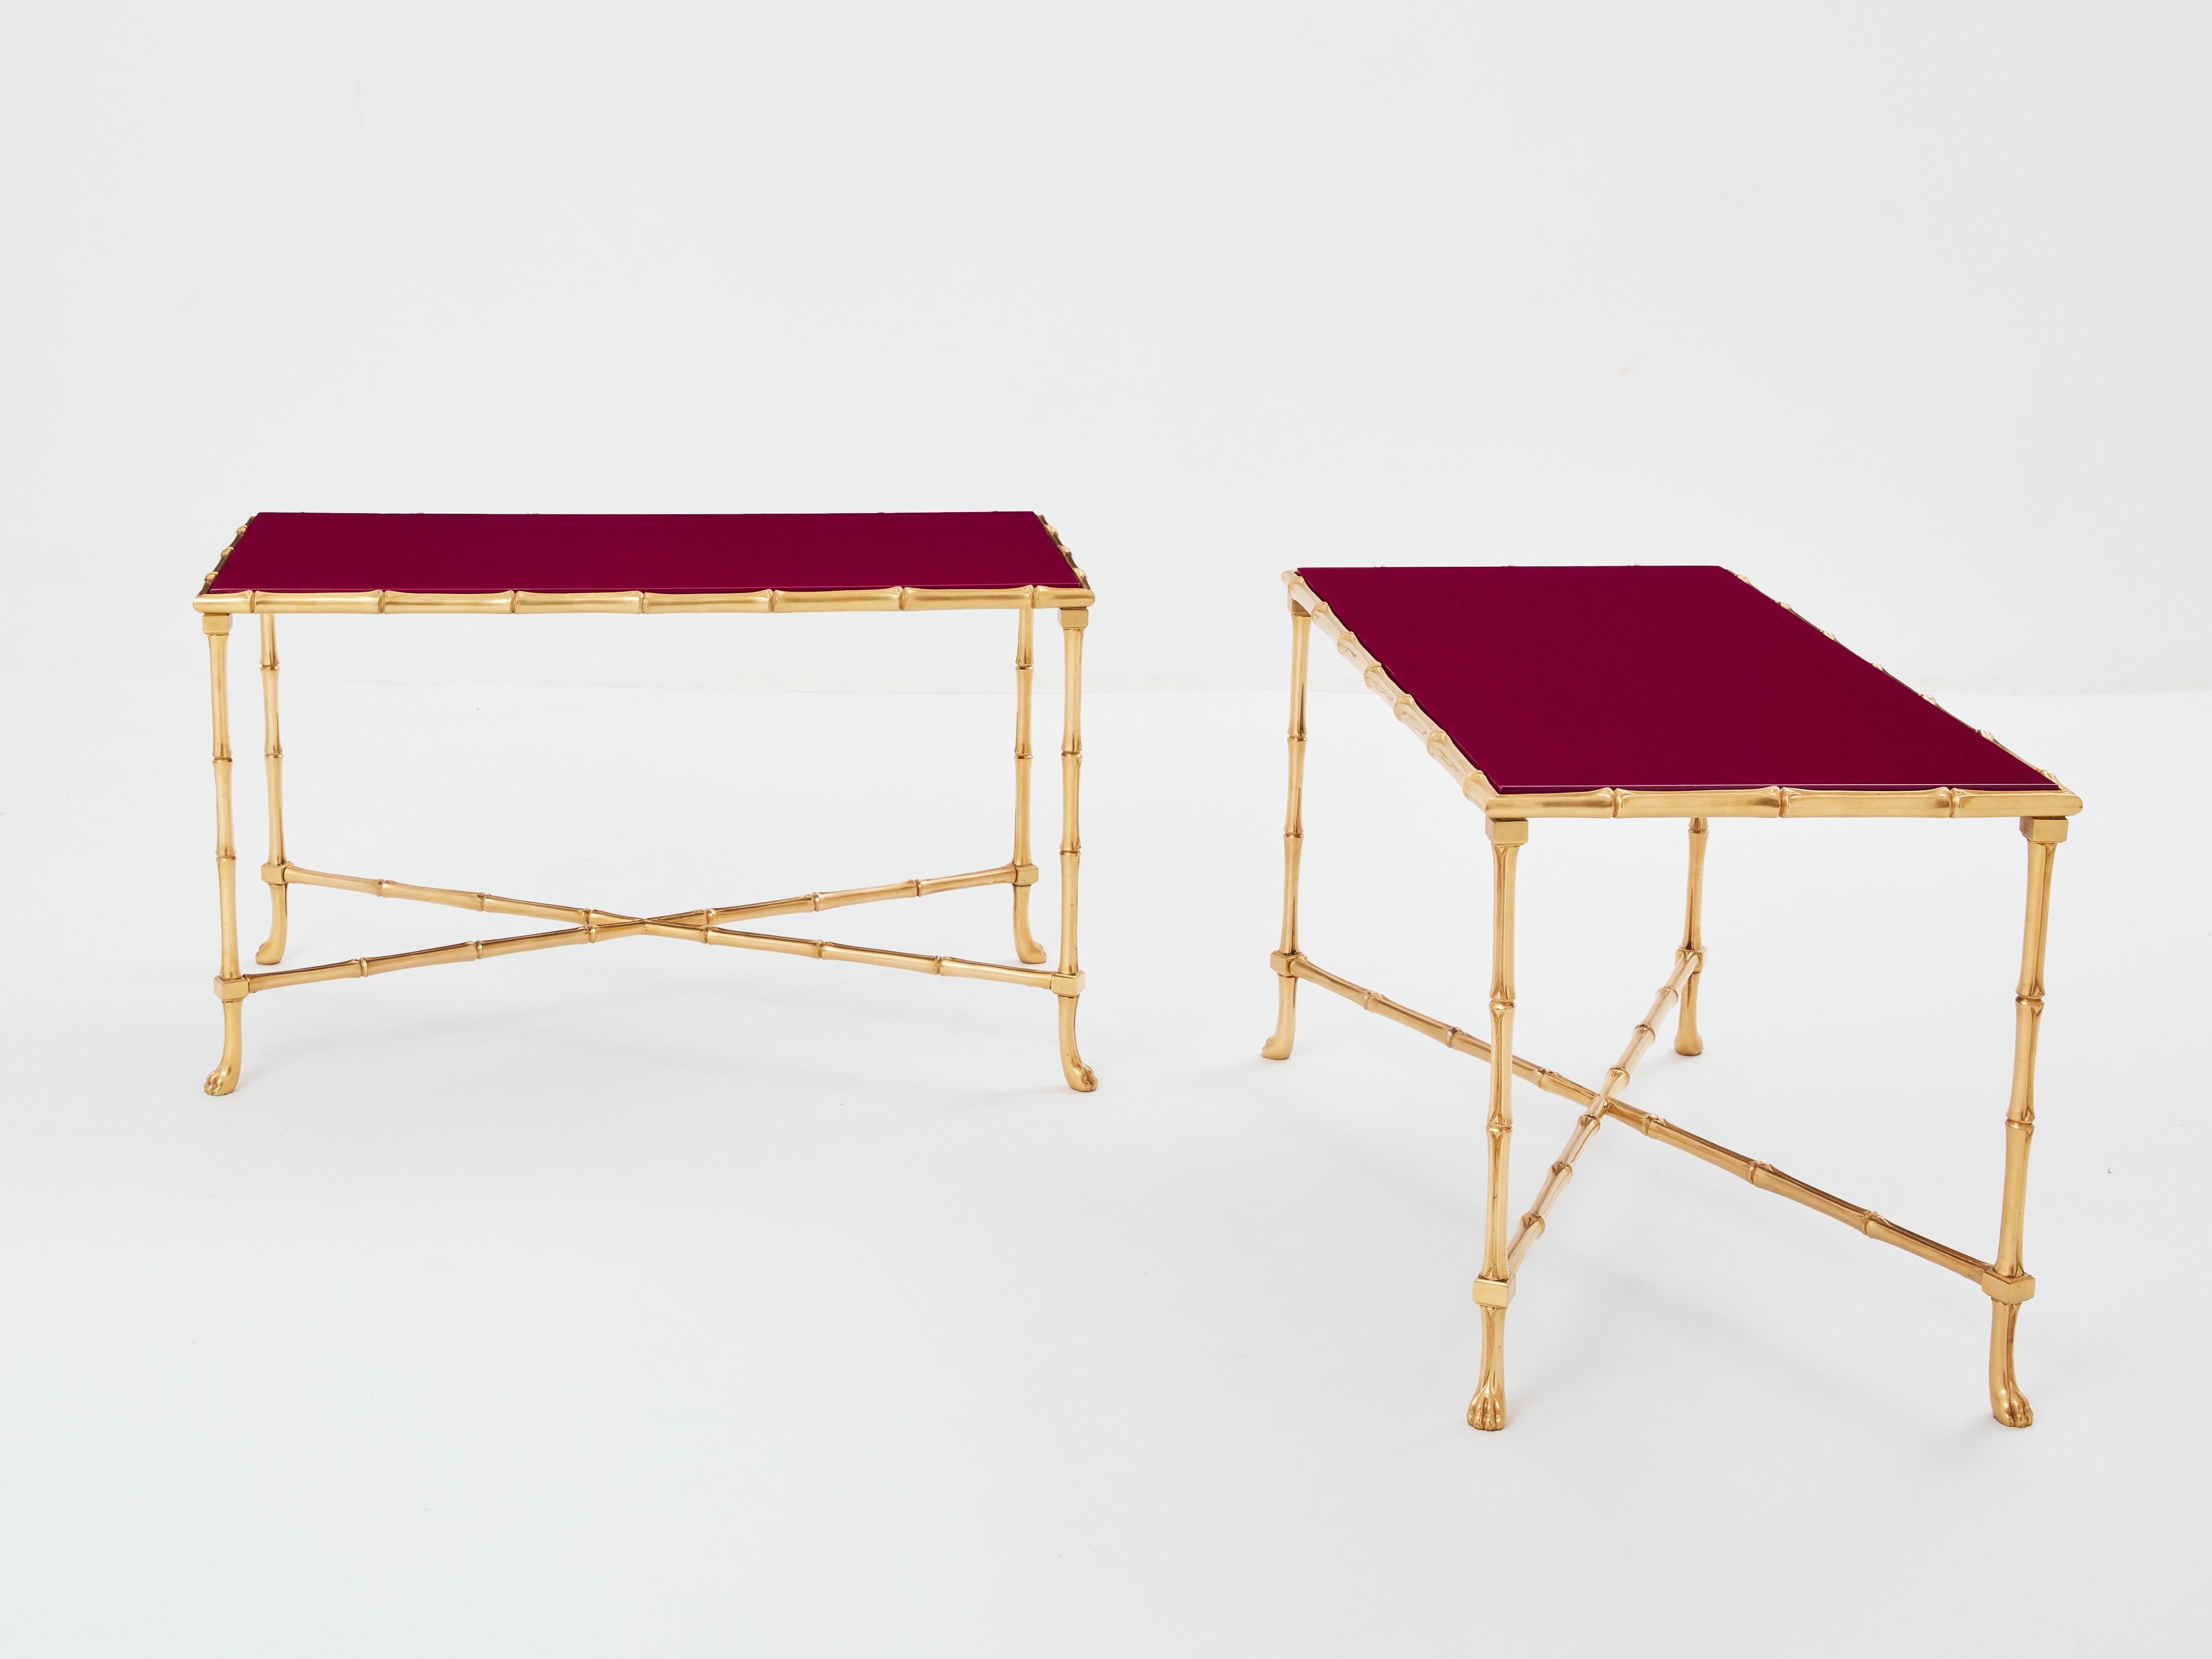 This beautiful pair of Maison Baguès end tables was created with solid bamboo shaped brass and beautiful raspberry red lacquer tops in the early 1960s. The lacquered tops are timeless and smooth, while the brass bamboo feet and body provide an